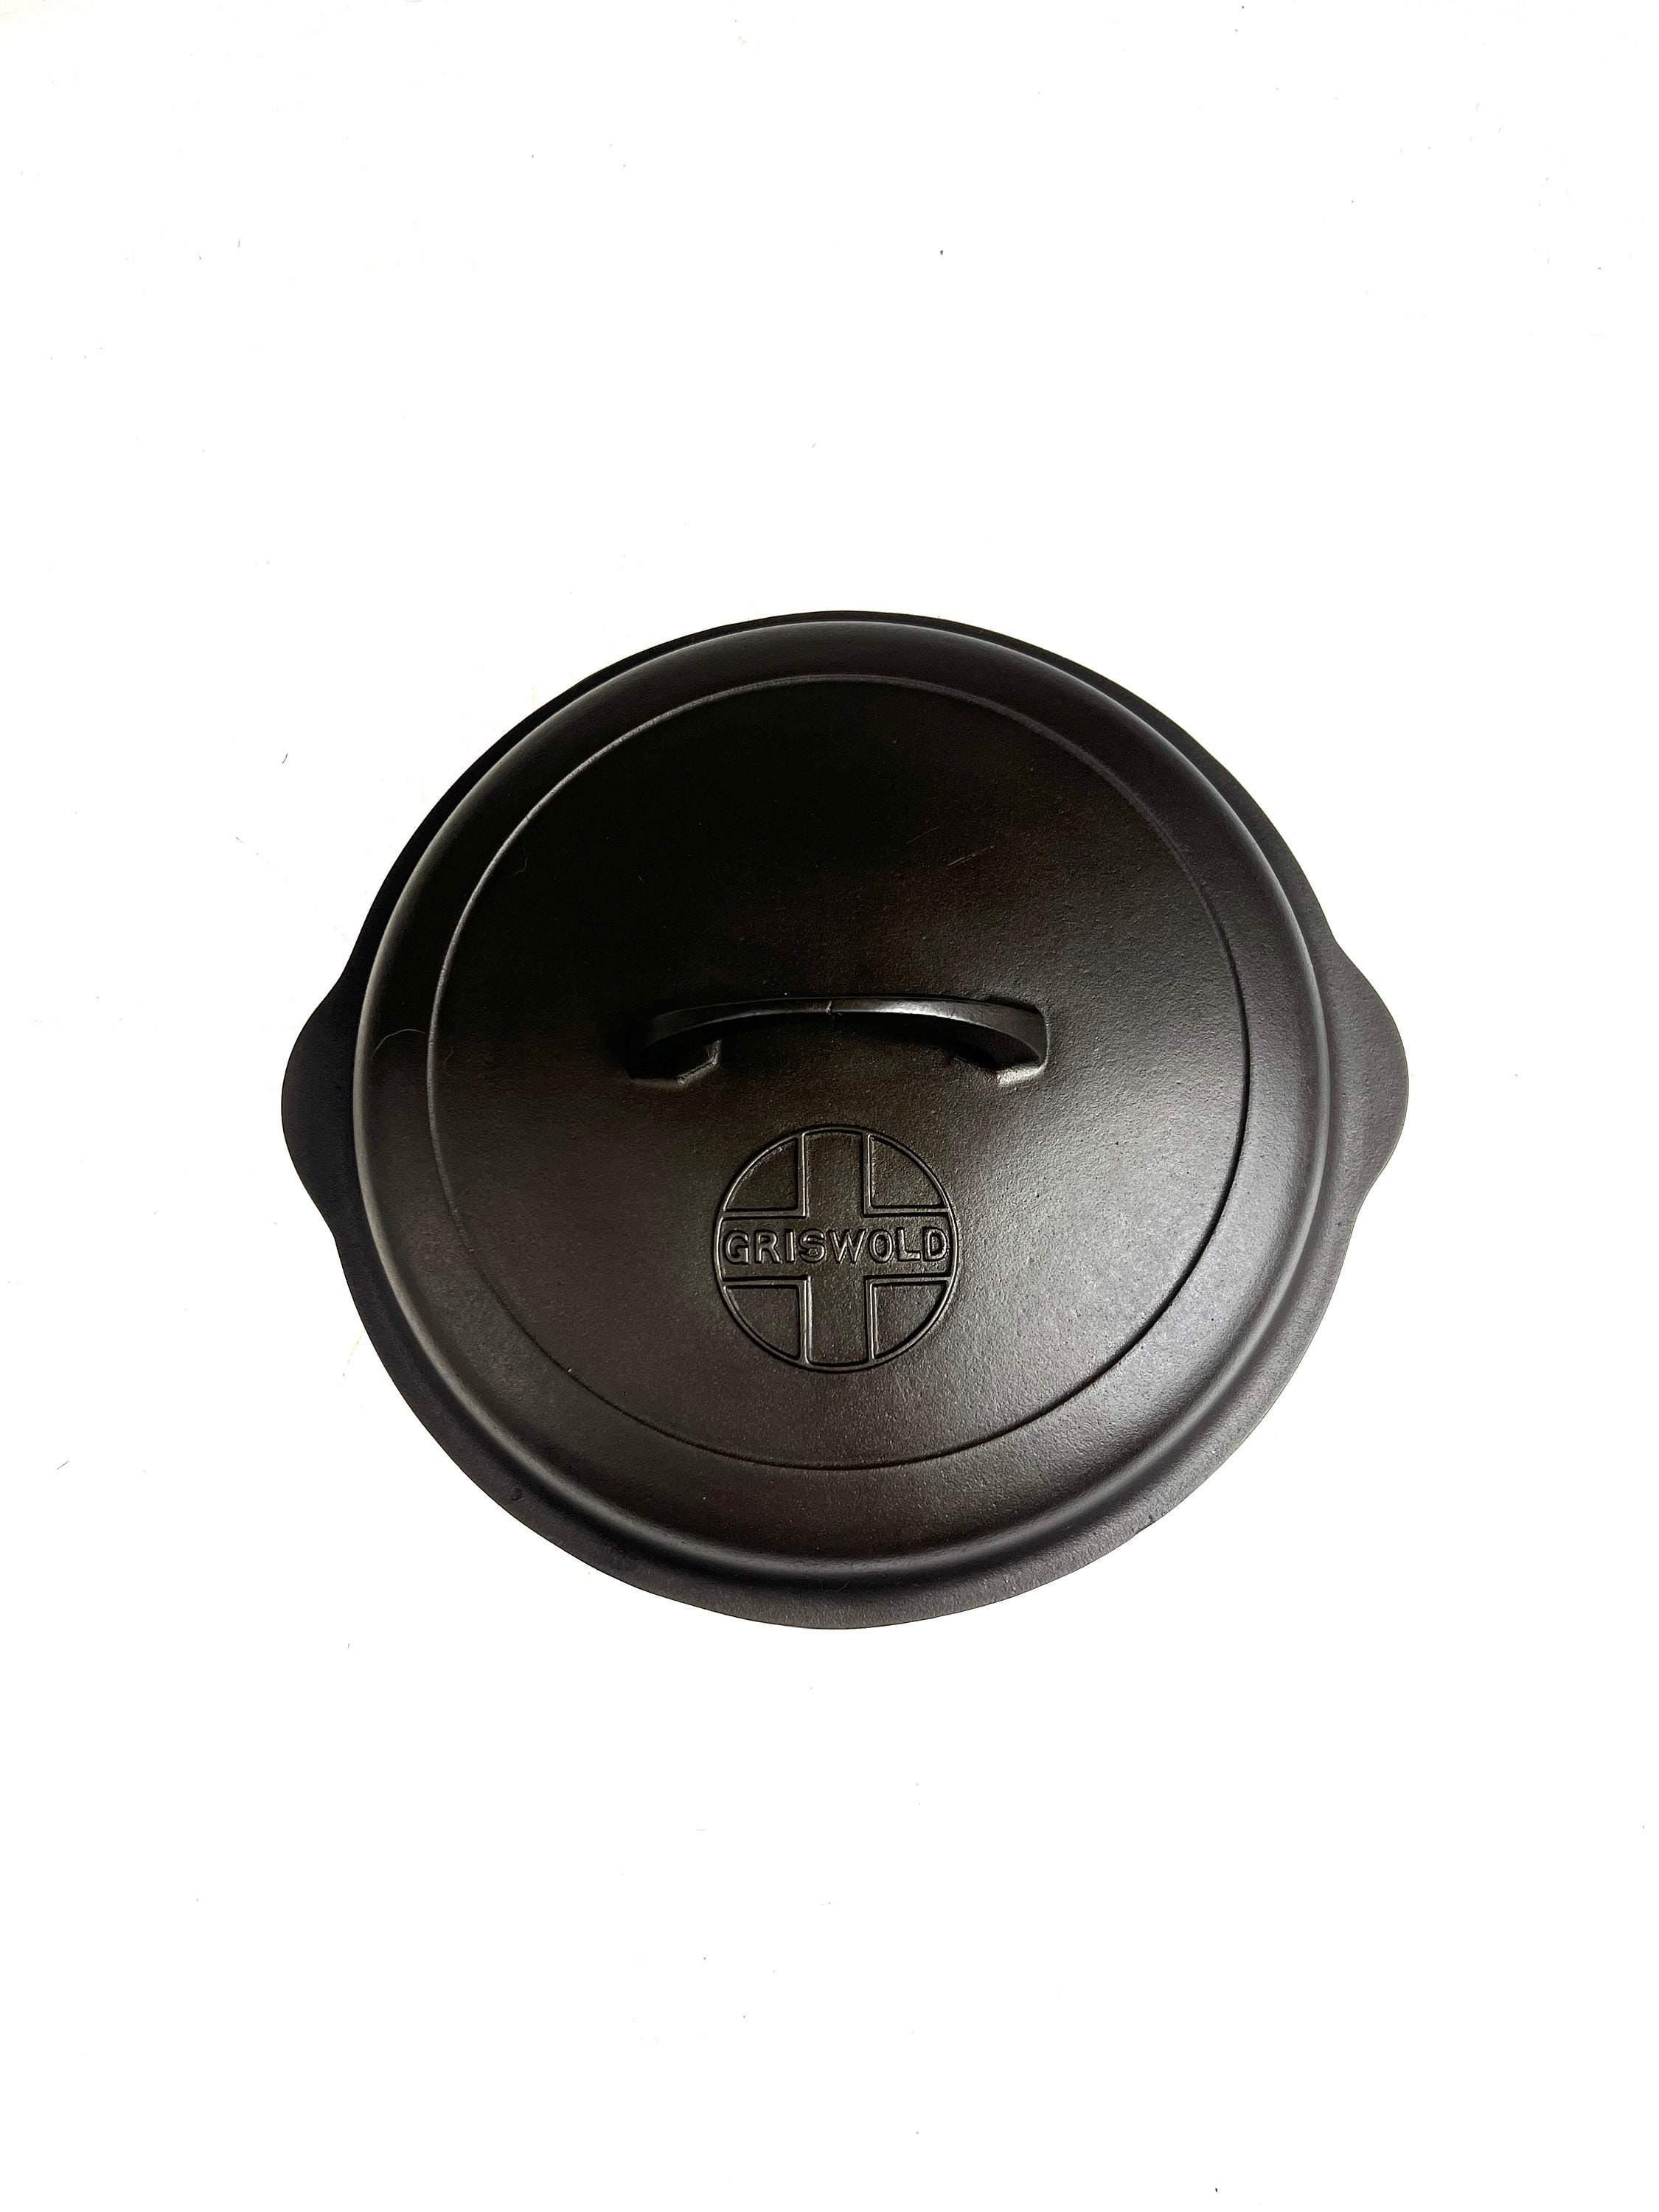 Griswold Antique Cast Iron Lids Collection (7) sold at auction on 22nd  September